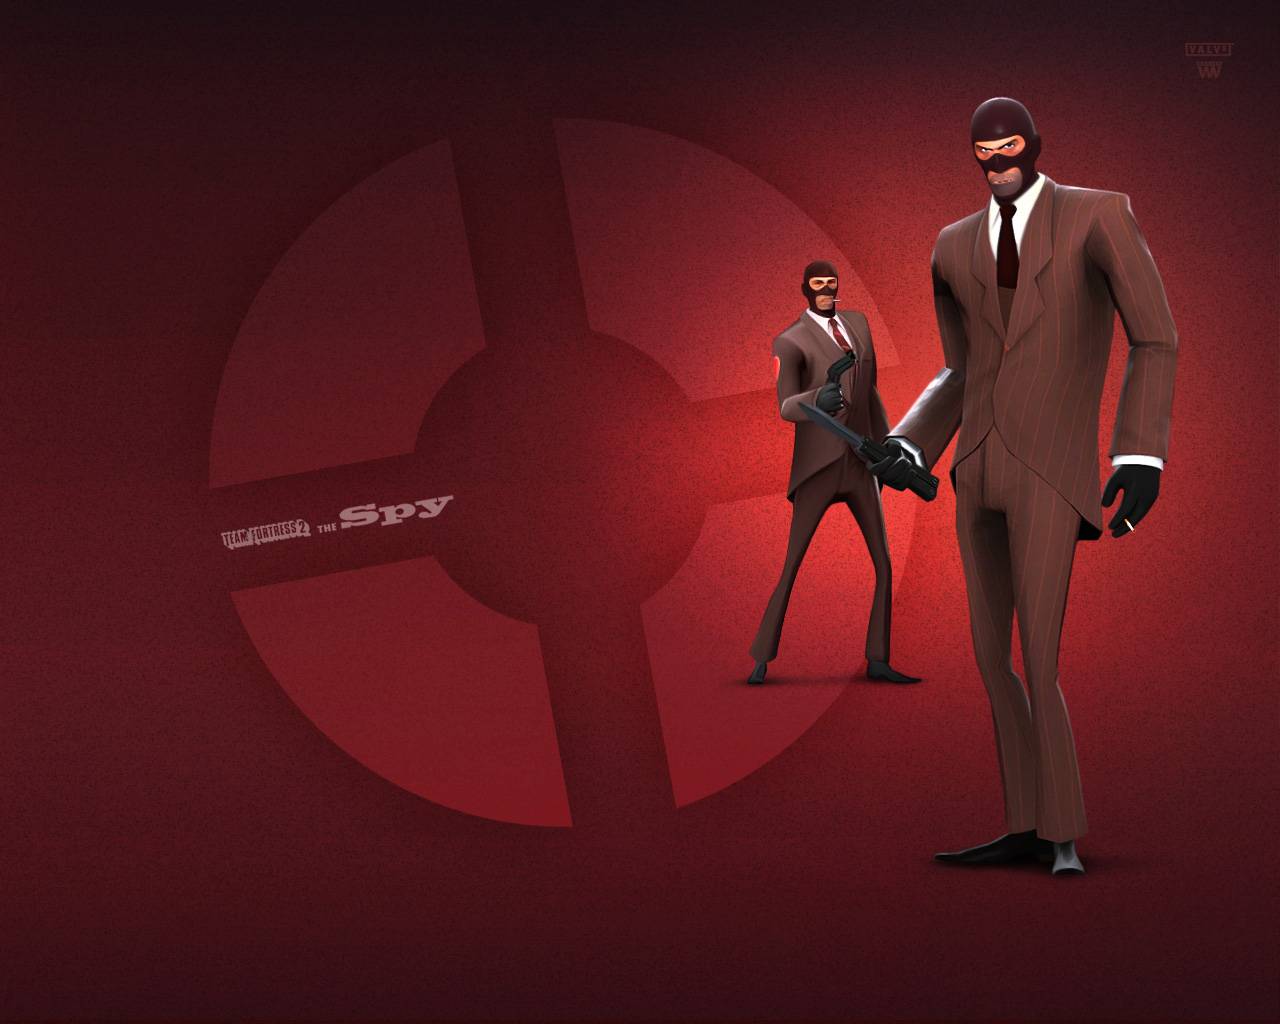 team fortress 2 download backgrounds team fortress 2 areas